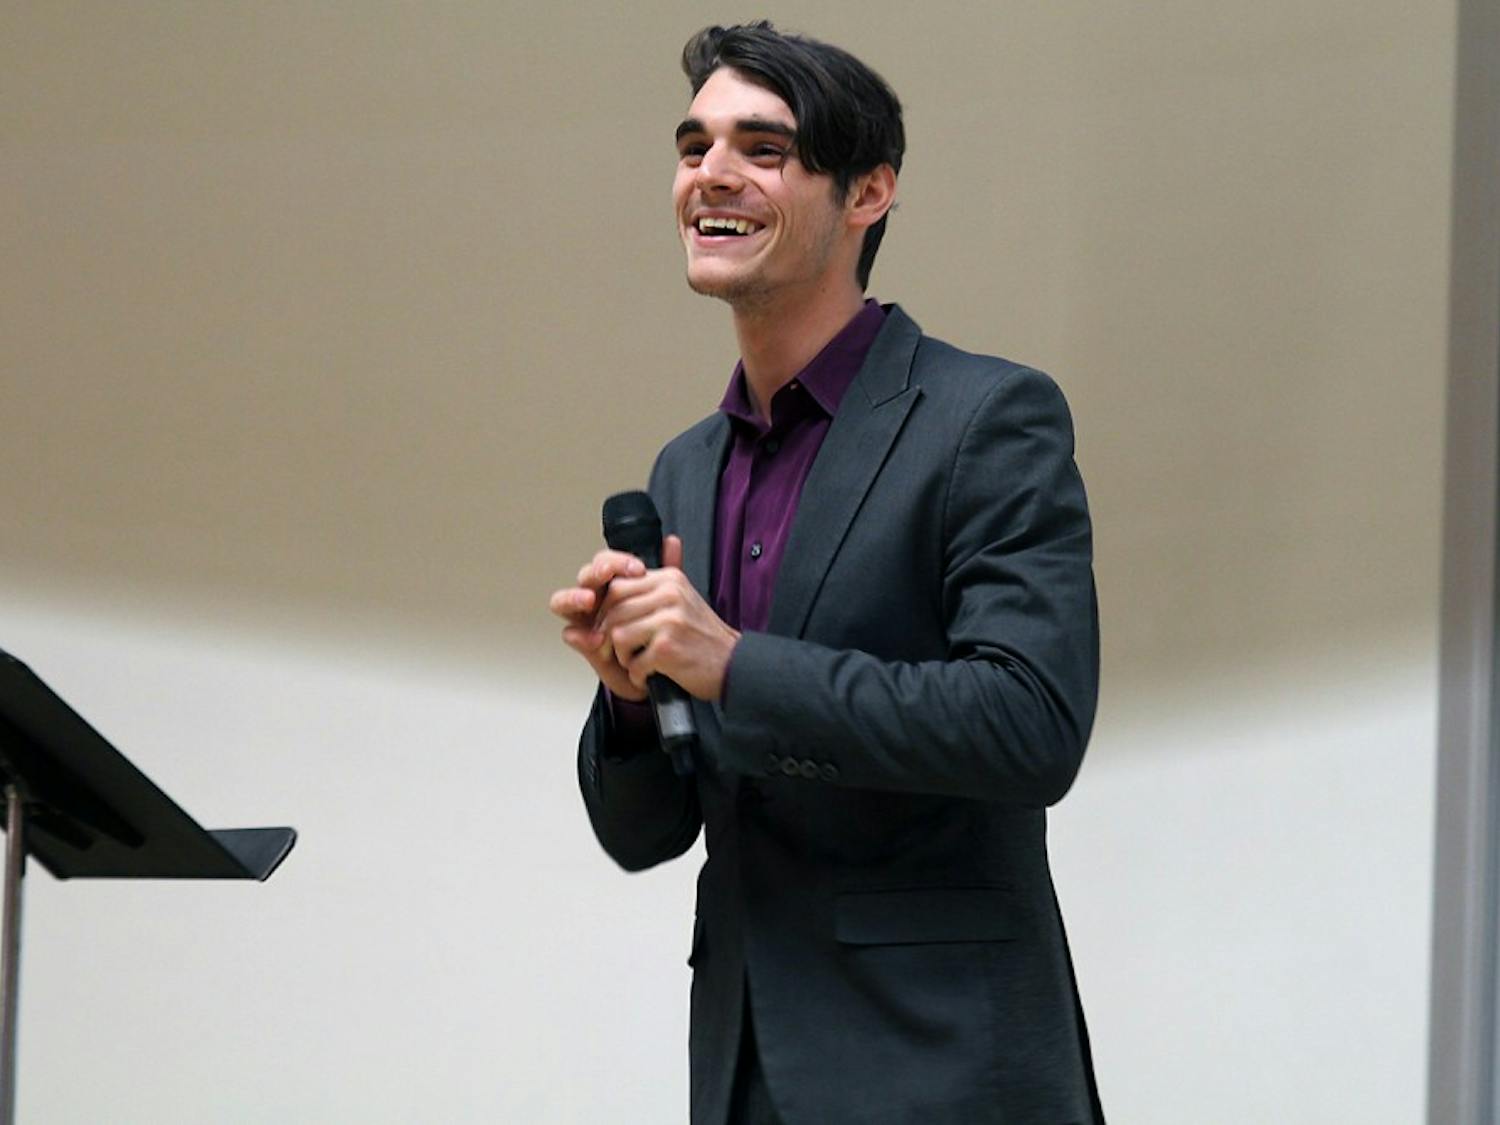 Actor RJ Mitte spoke about living with cerebral palsy in the Genome Sciences Building on Thursday. 